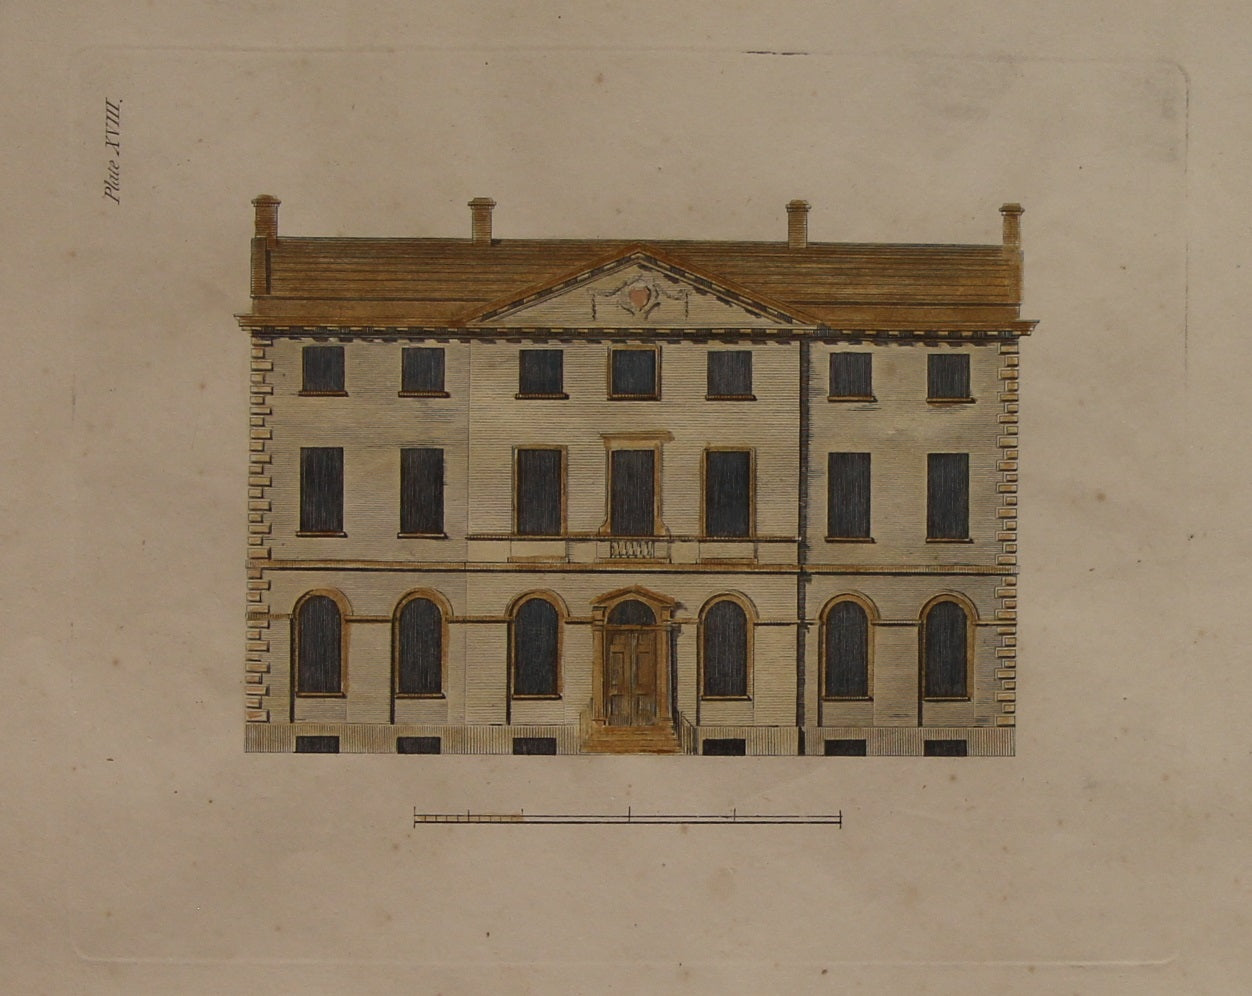 Architecture, Plate XVII and Plate XVIII, John Carter, c1800, Set of Two